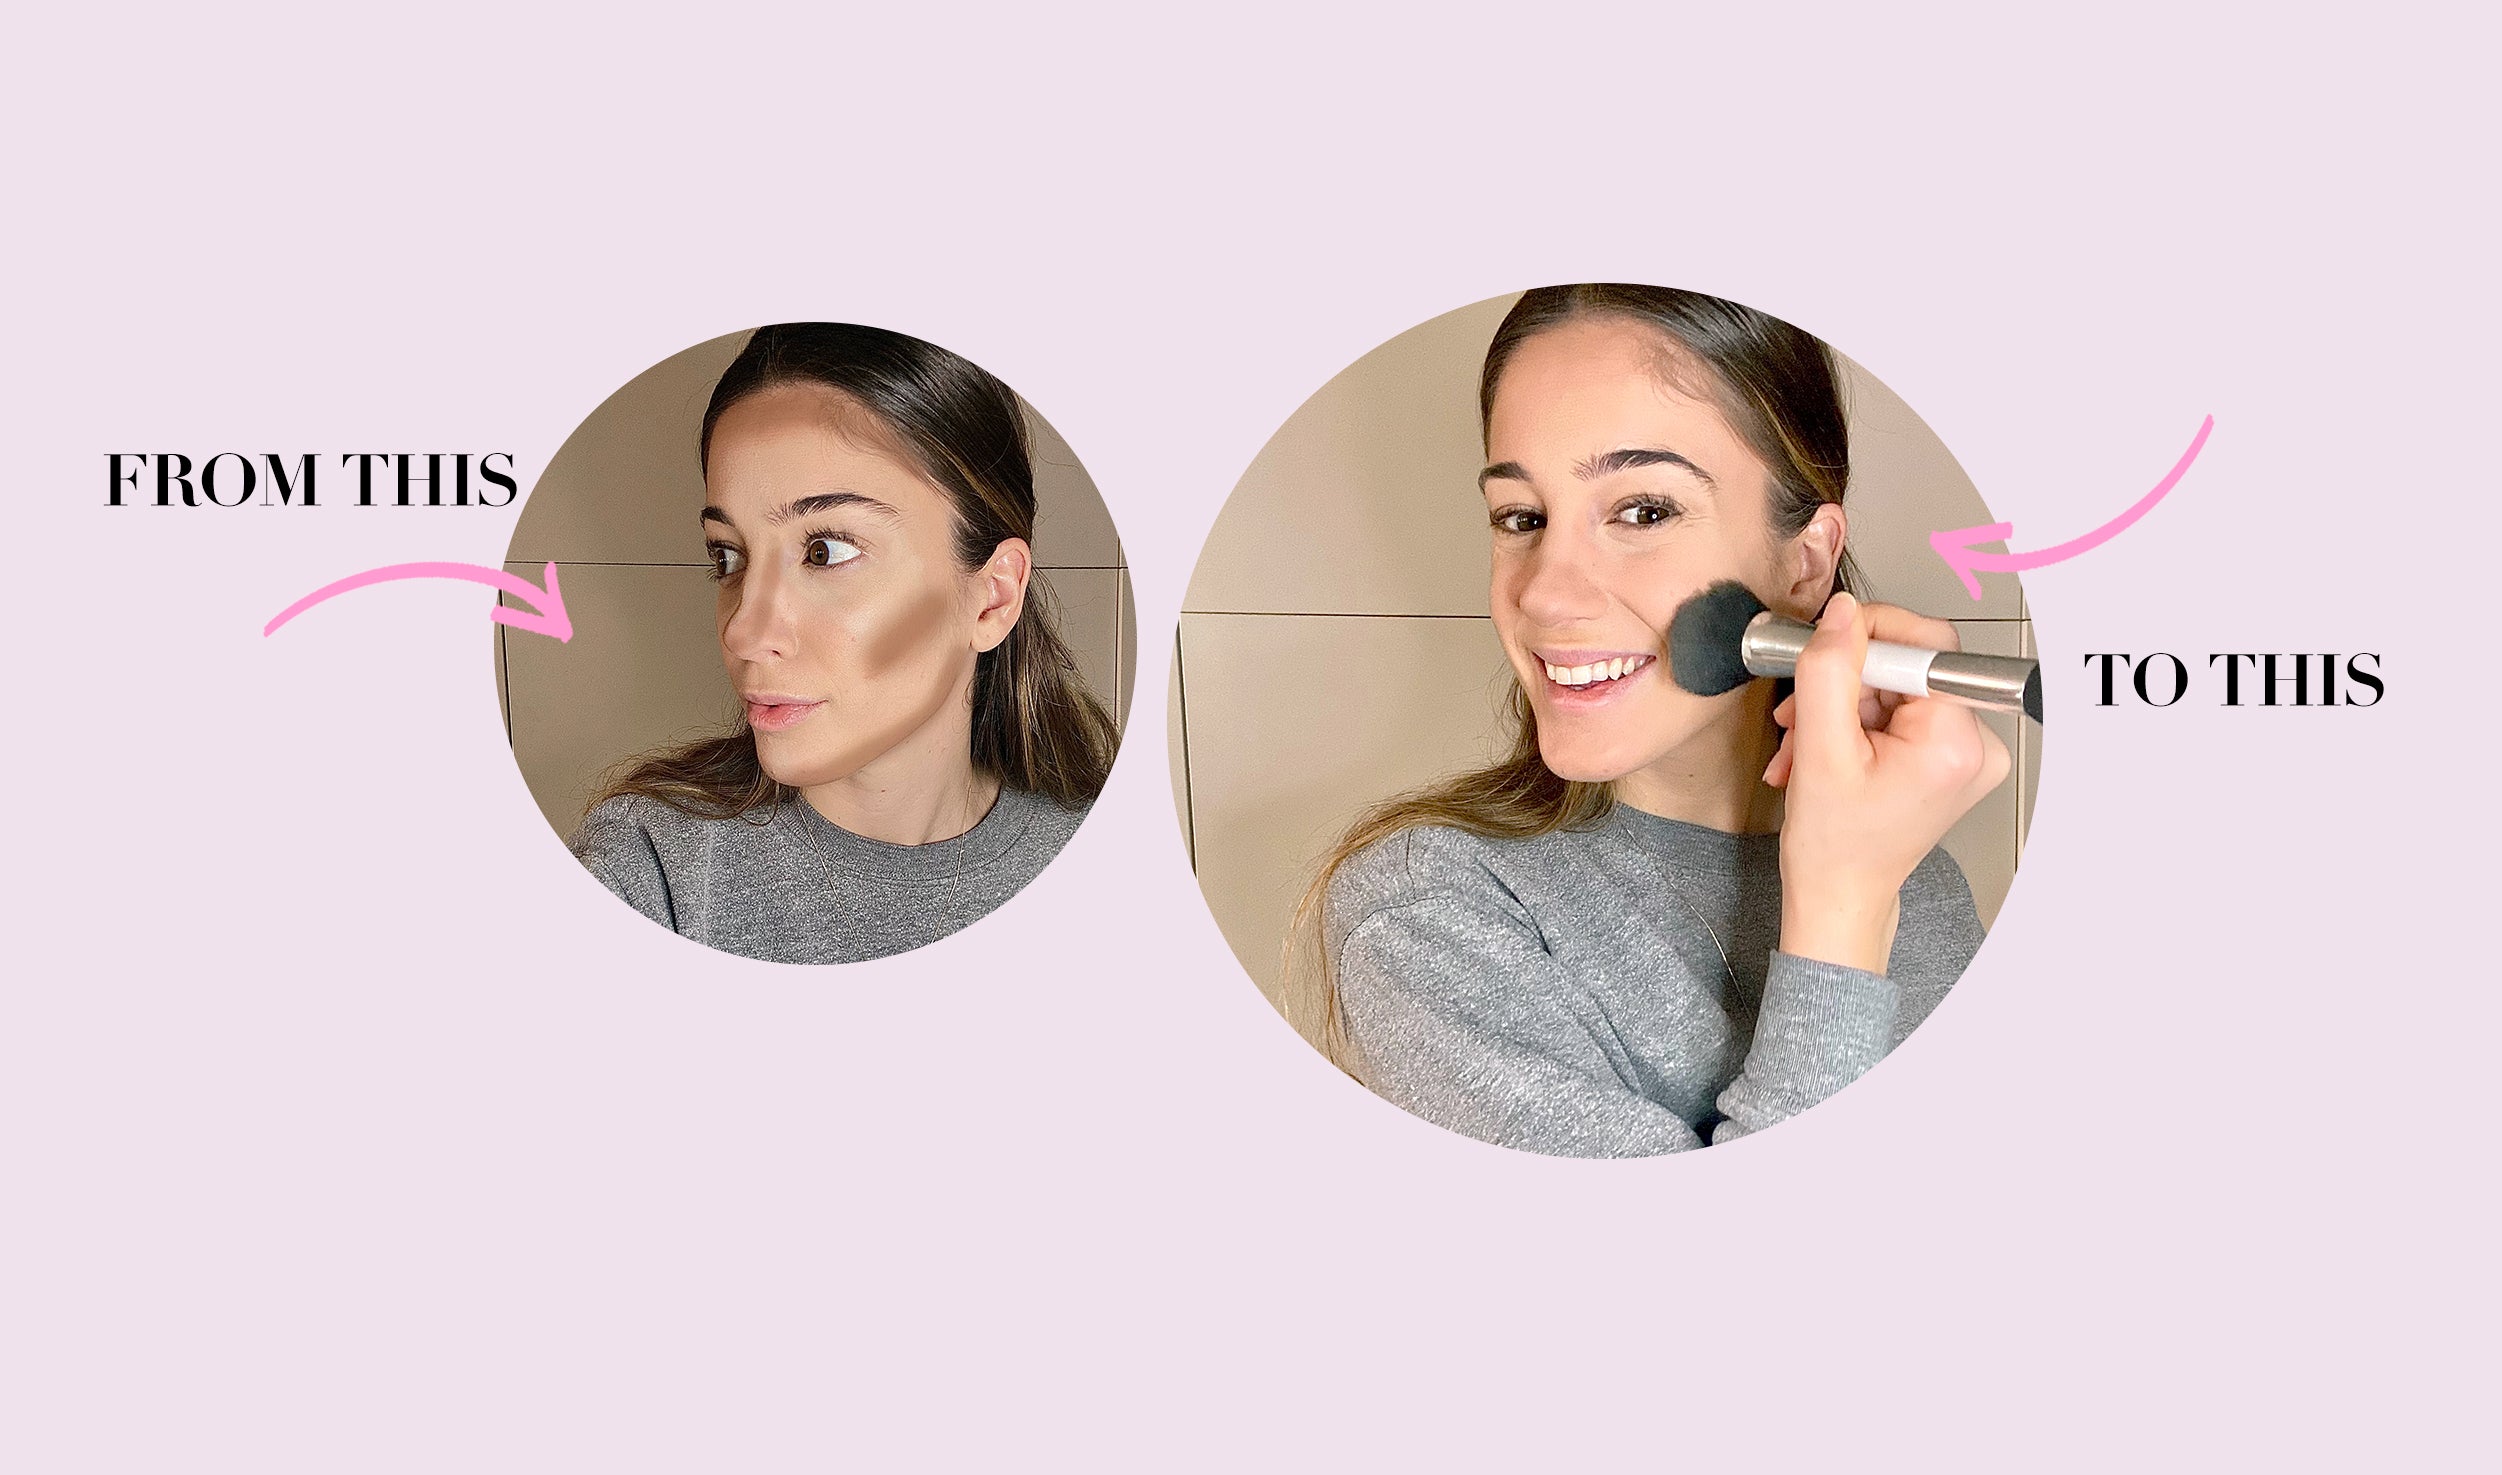 Less is more with everyday contour makeup! This is my method for face